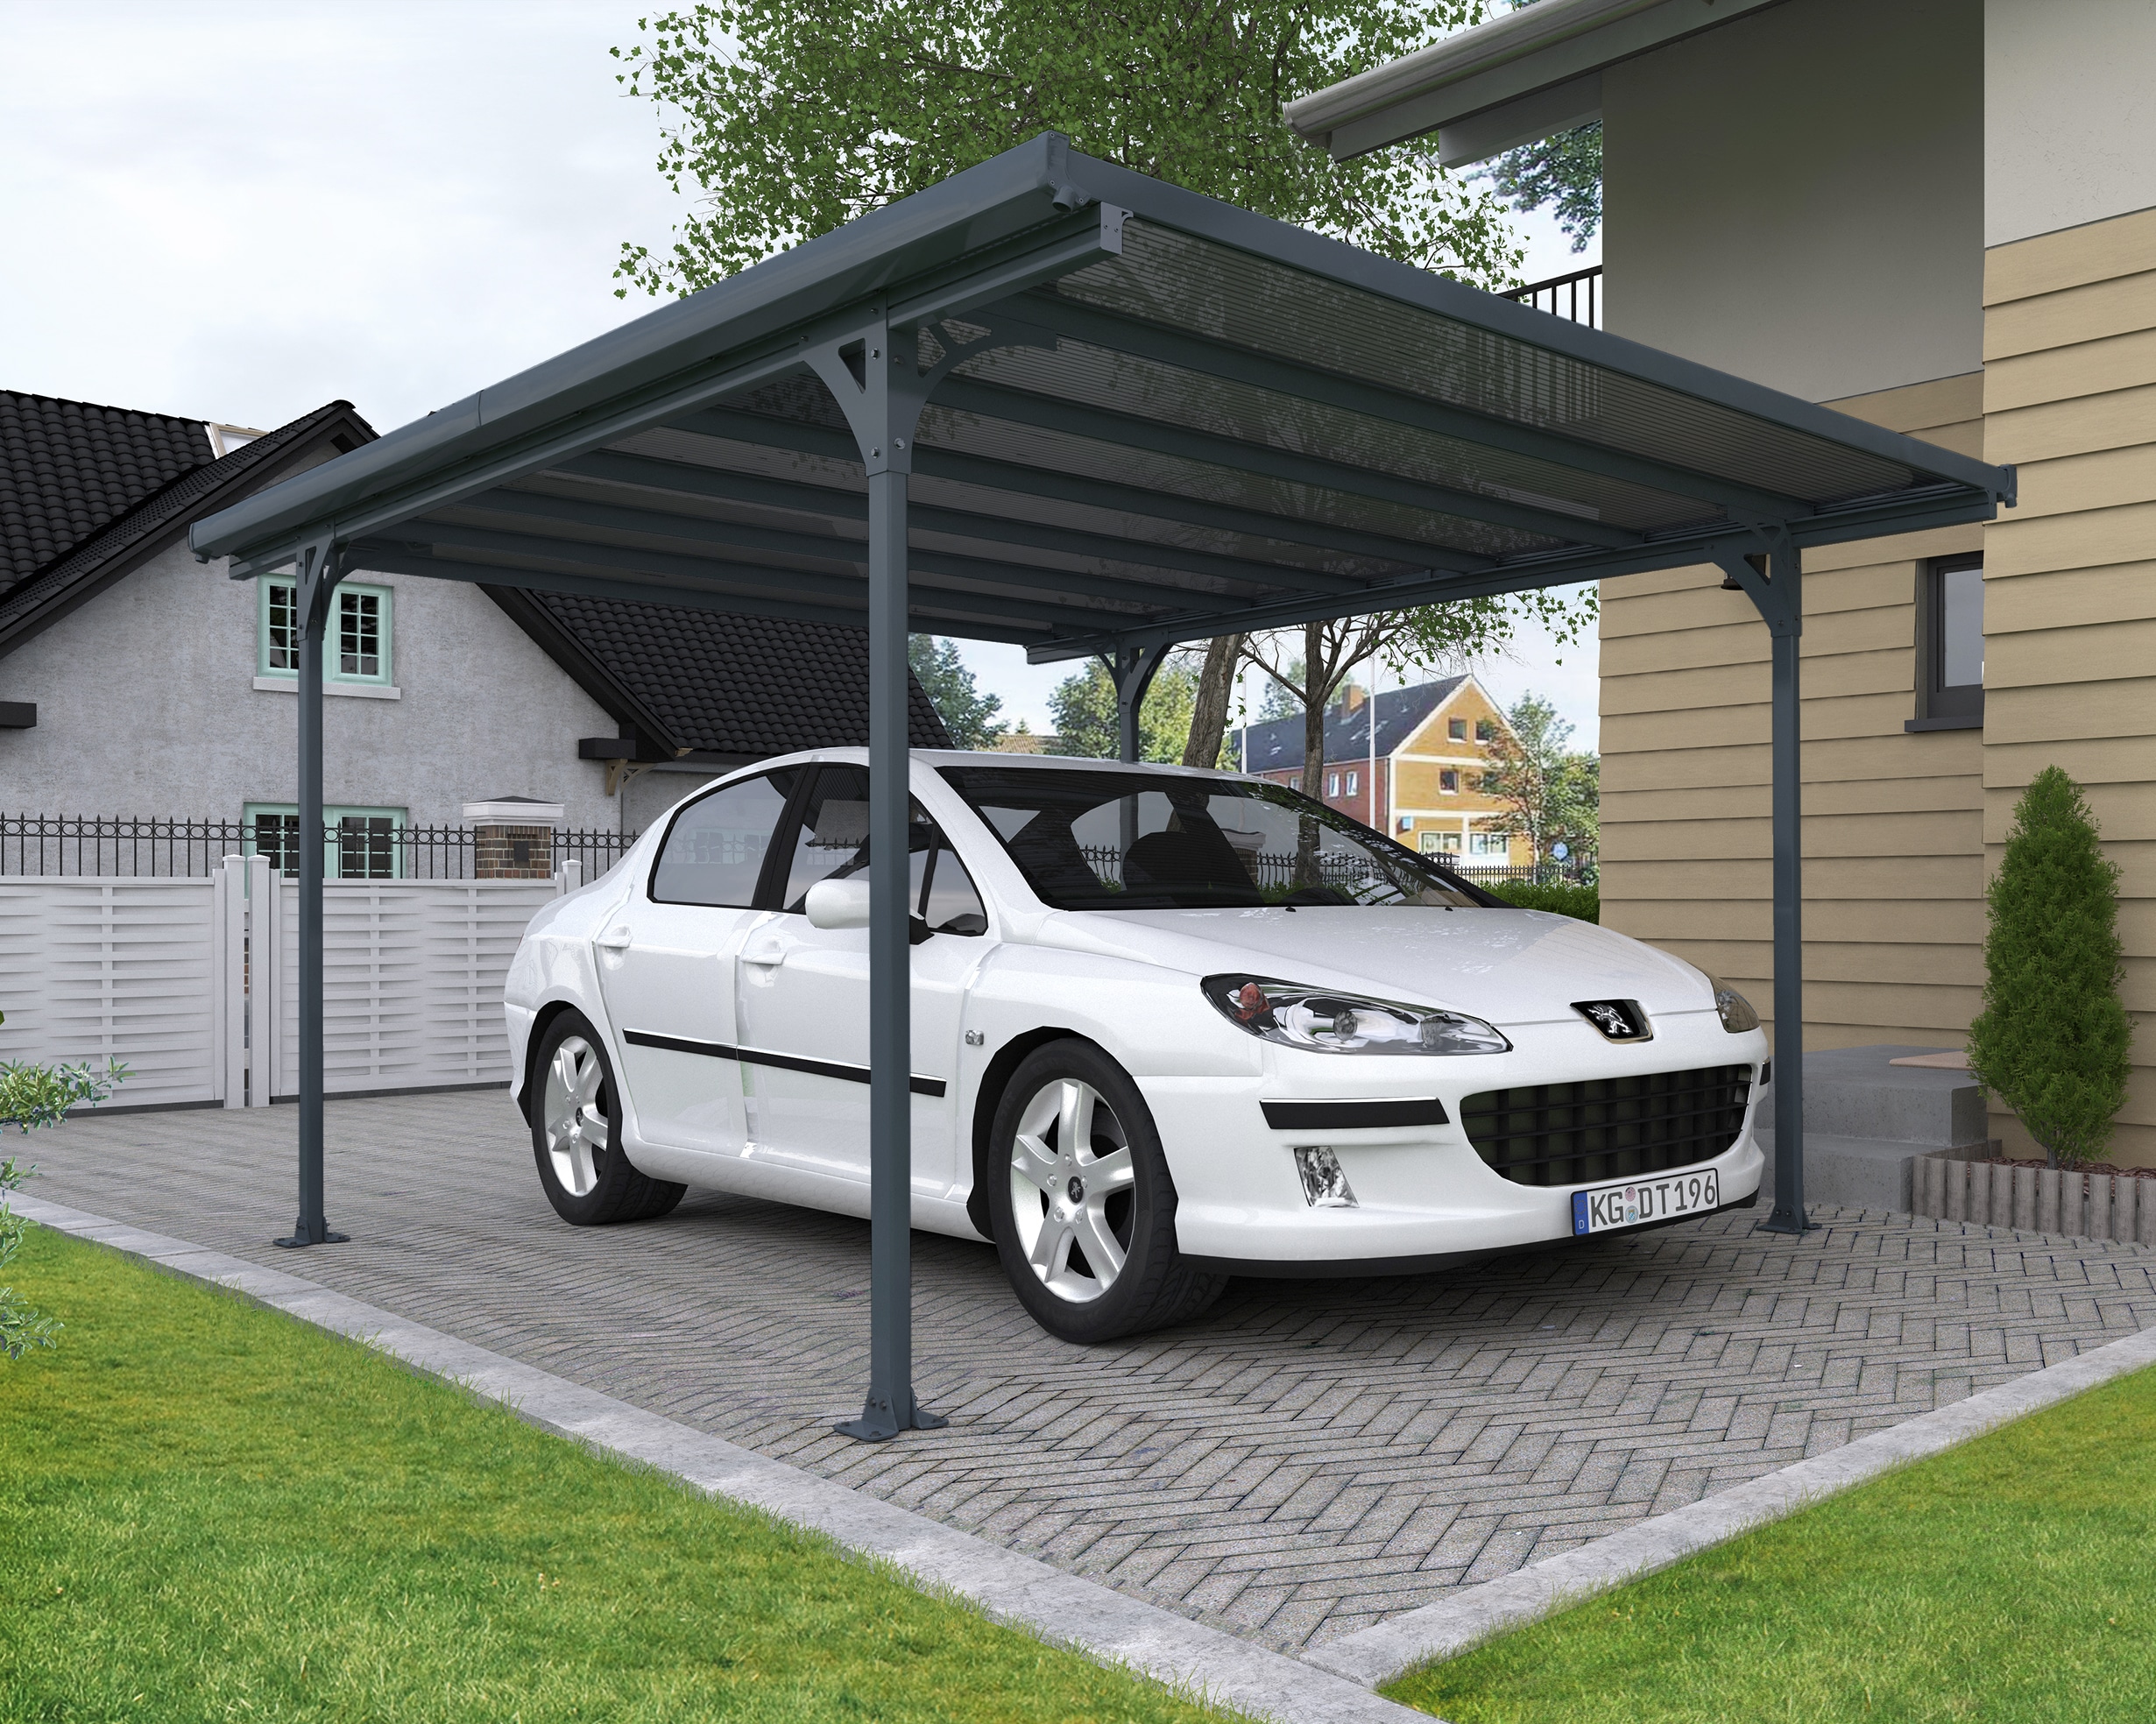 Panels Bronze at by department in Carport Aluminum H L Frame 7.11-ft the and Gray x Carports W x Canopia Palram 16-ft 10-ft Roof